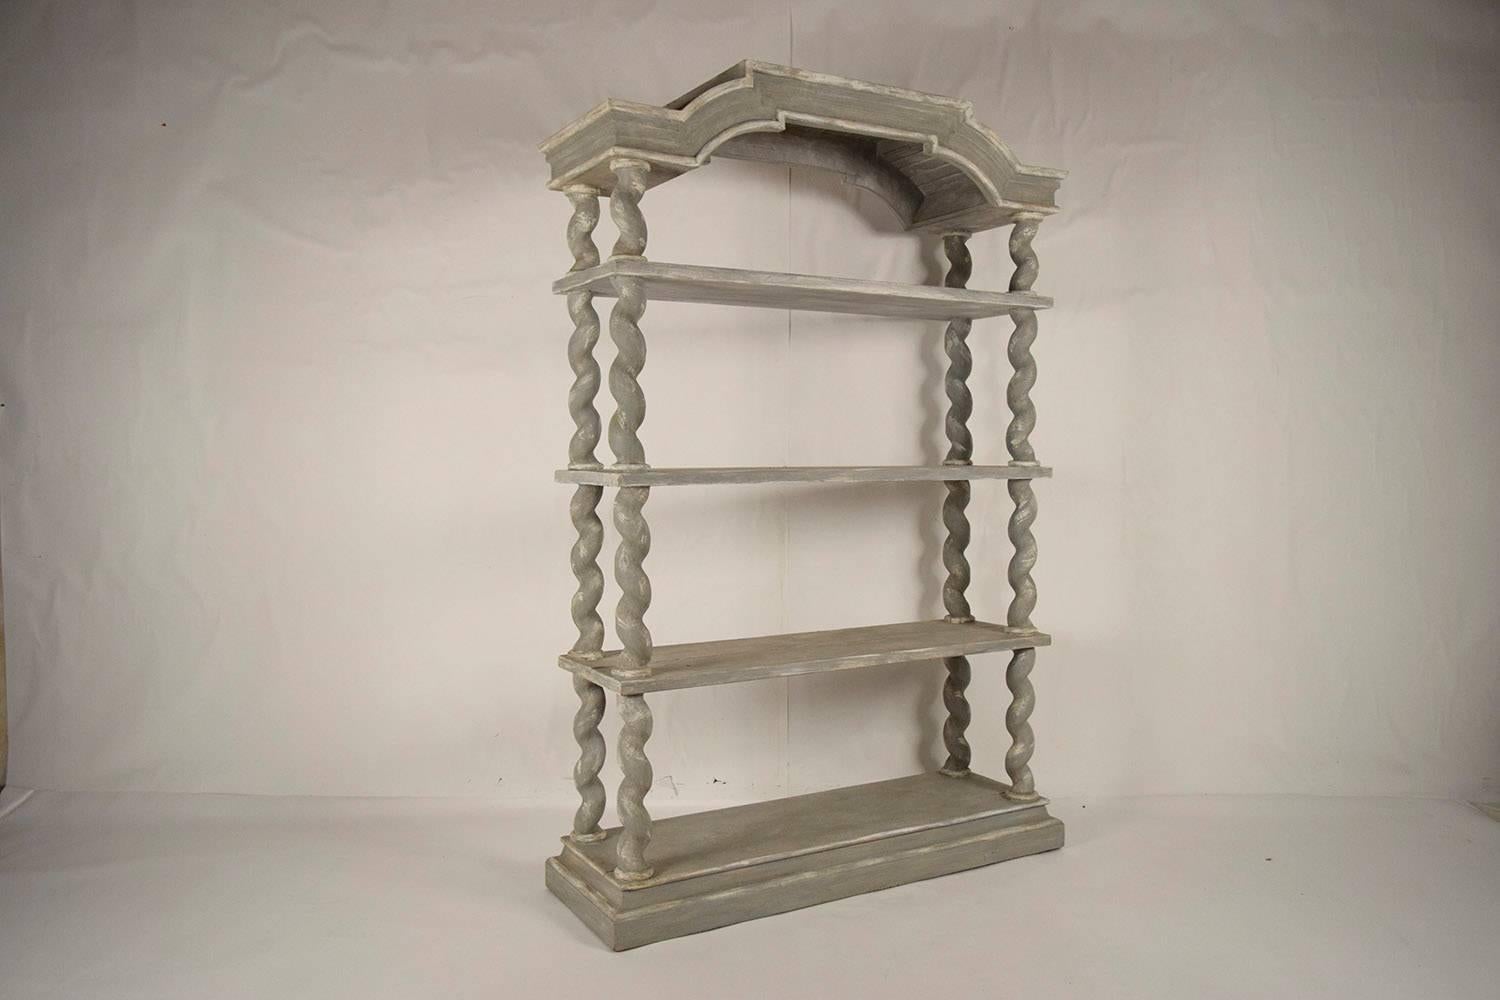 This large 1970s four-tier etagere or bookshelf is made of solid wood and is recently painted in a grey and oyster color combination with a distressed finish. The elegant pediment on top is supported by thick twisted supports and ha three thick